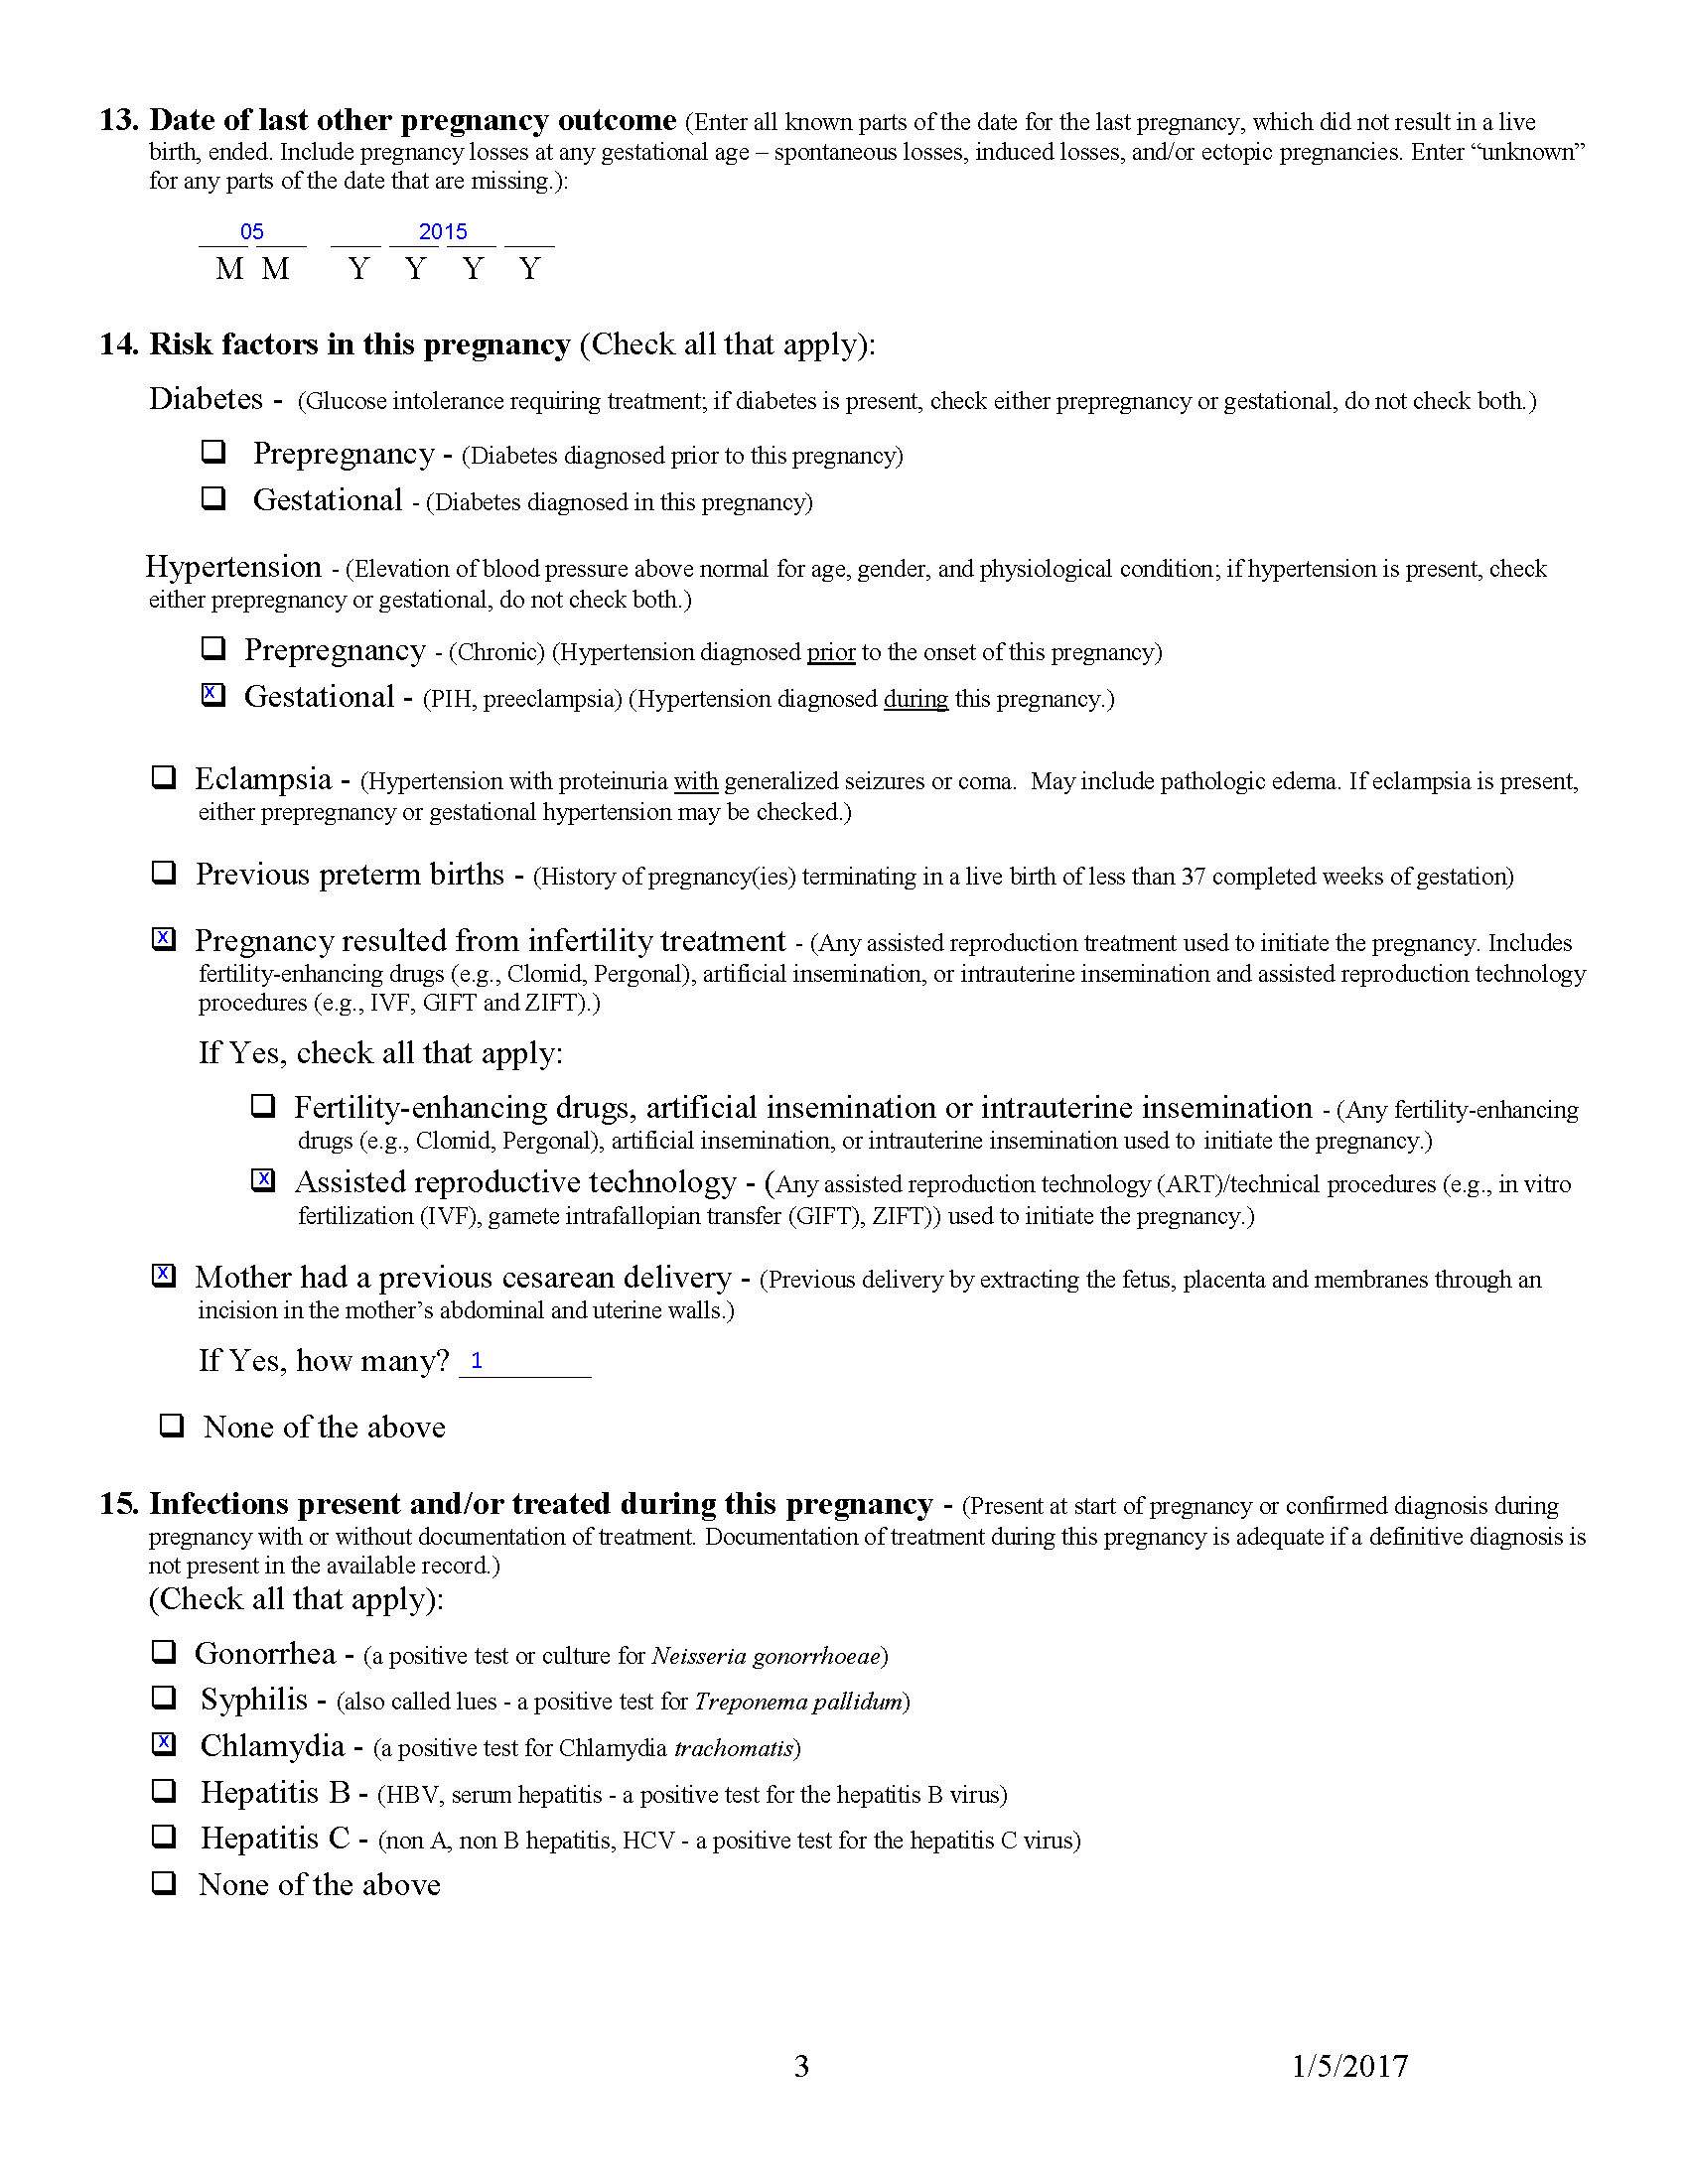 Example Facility Worksheet for Live Birth Certificate for Baby G Quinn - p3